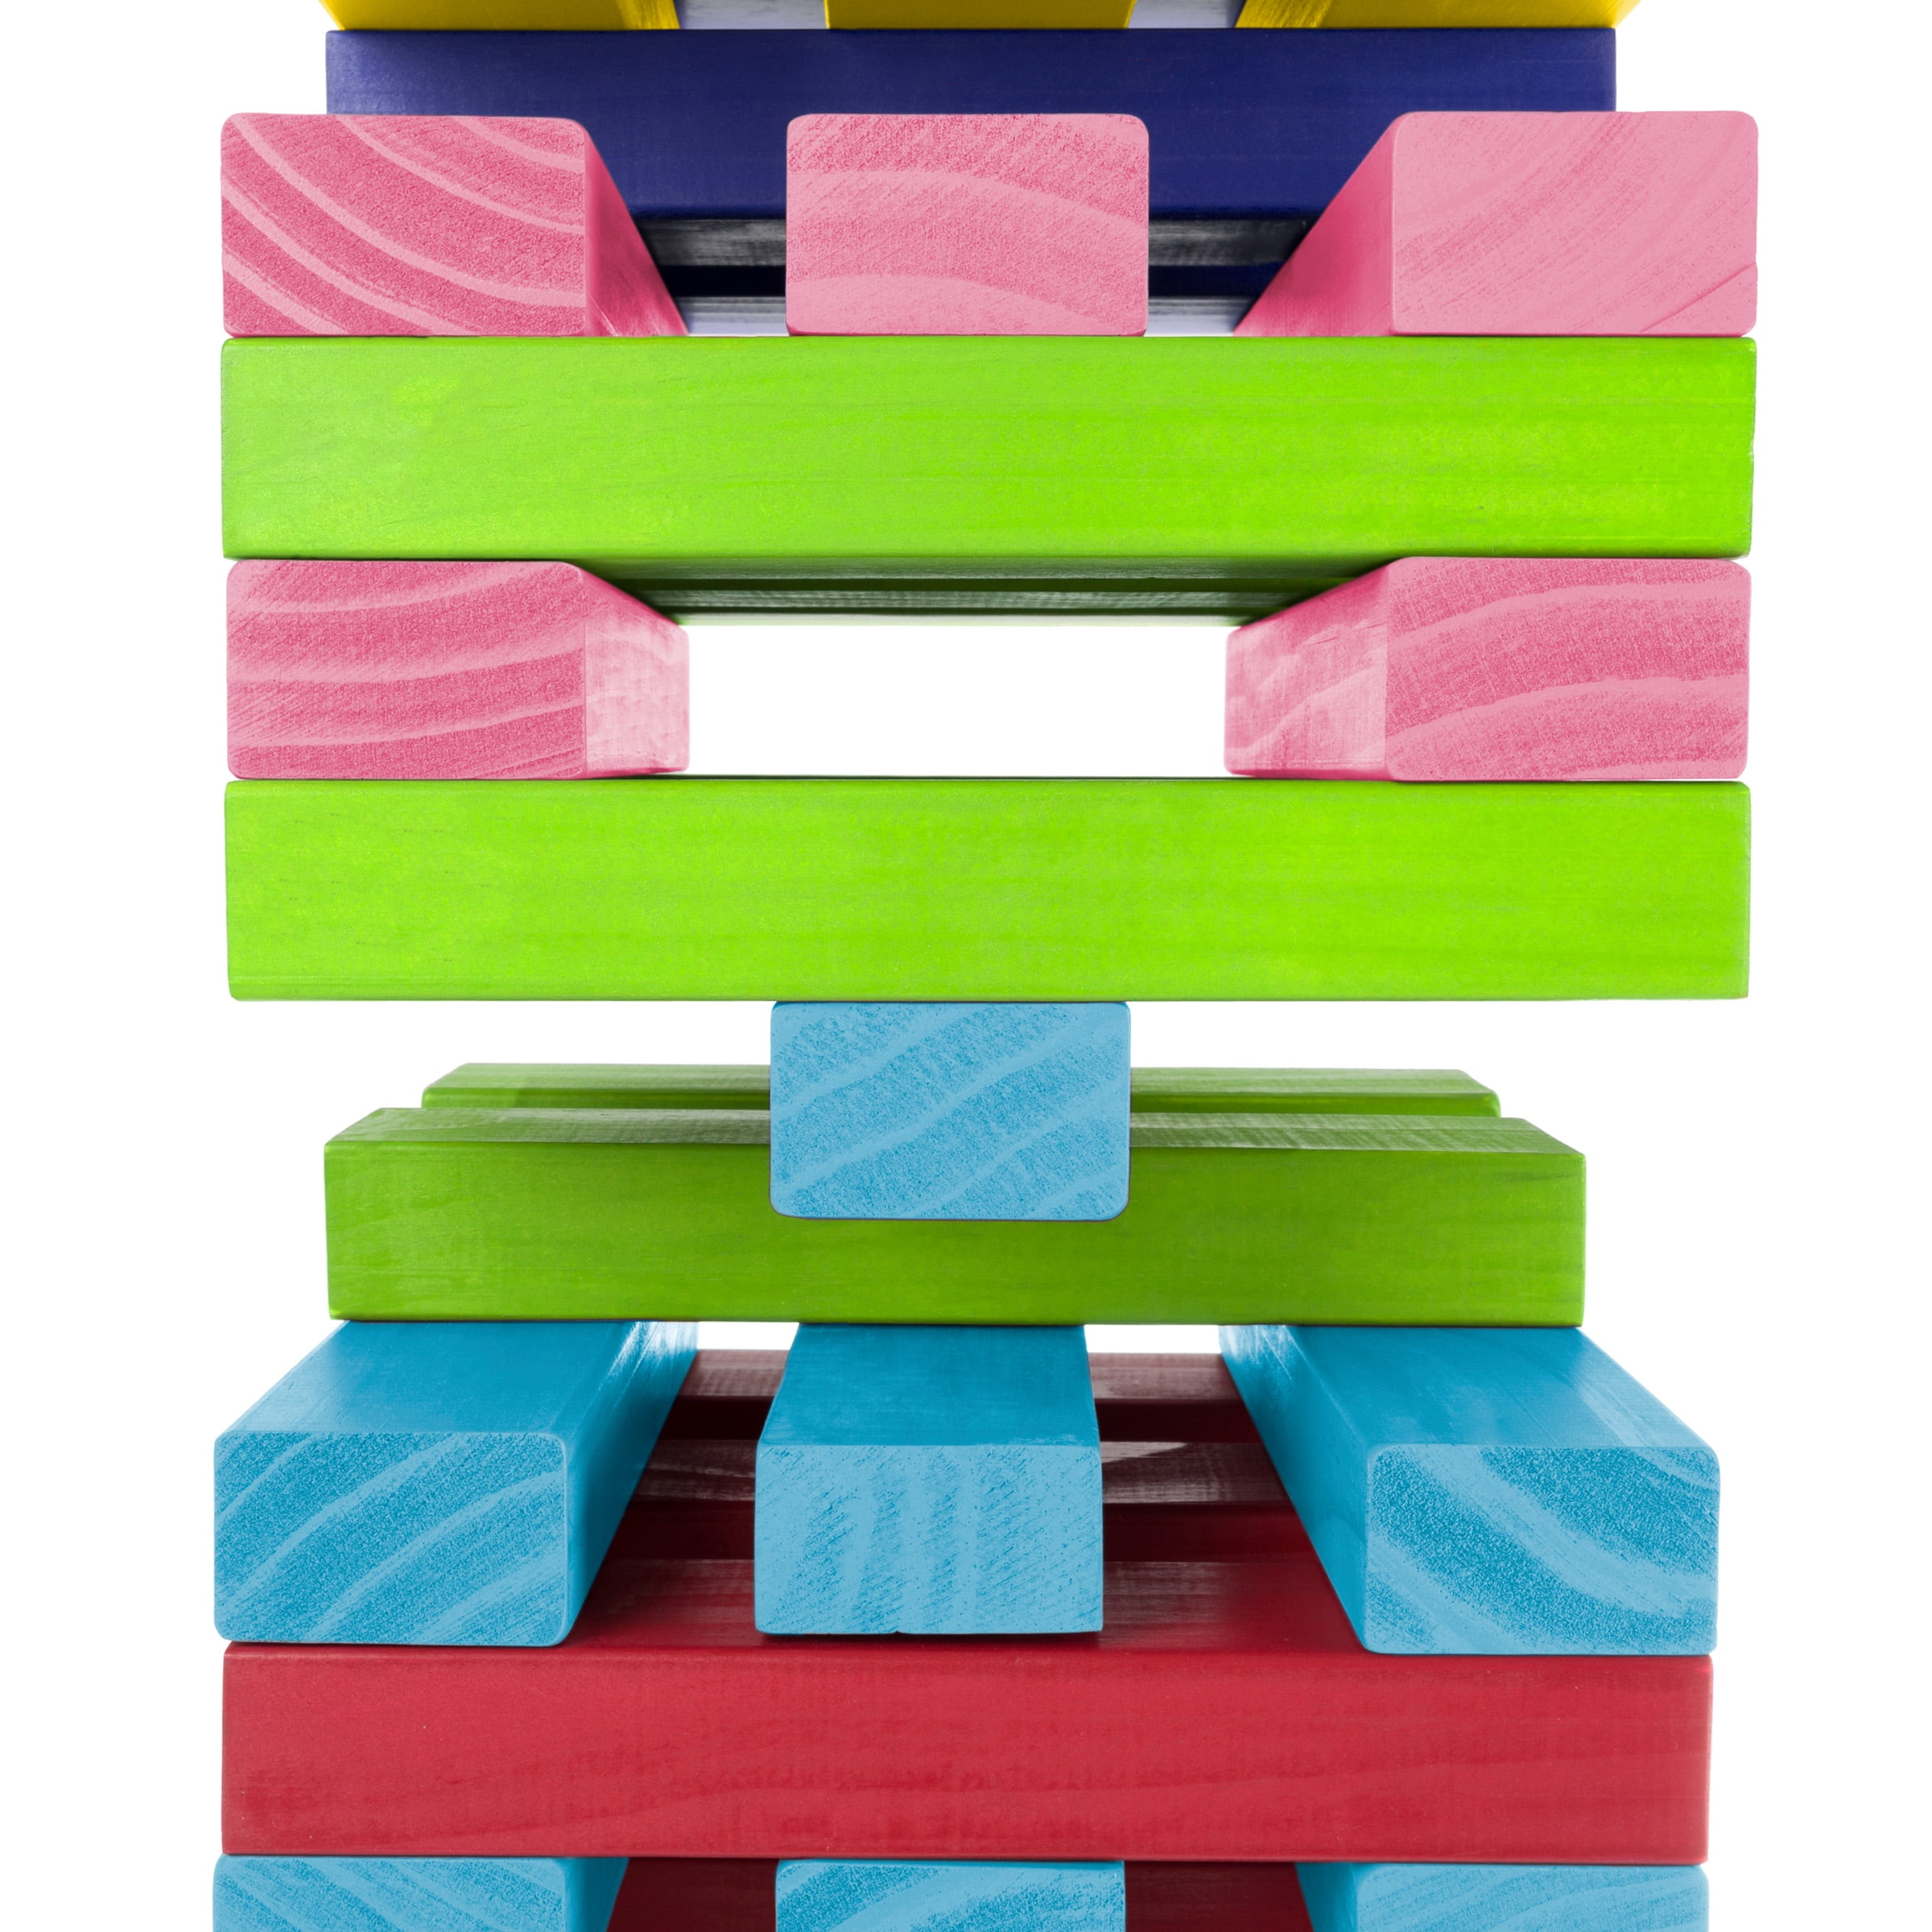 Hey! Play! Nontraditional Giant Wooden Blocks Tower Stacking Game with  Dice, Outdoor Yard Game, for Adults, Kids, Boys and Girls (Rainbow Color)